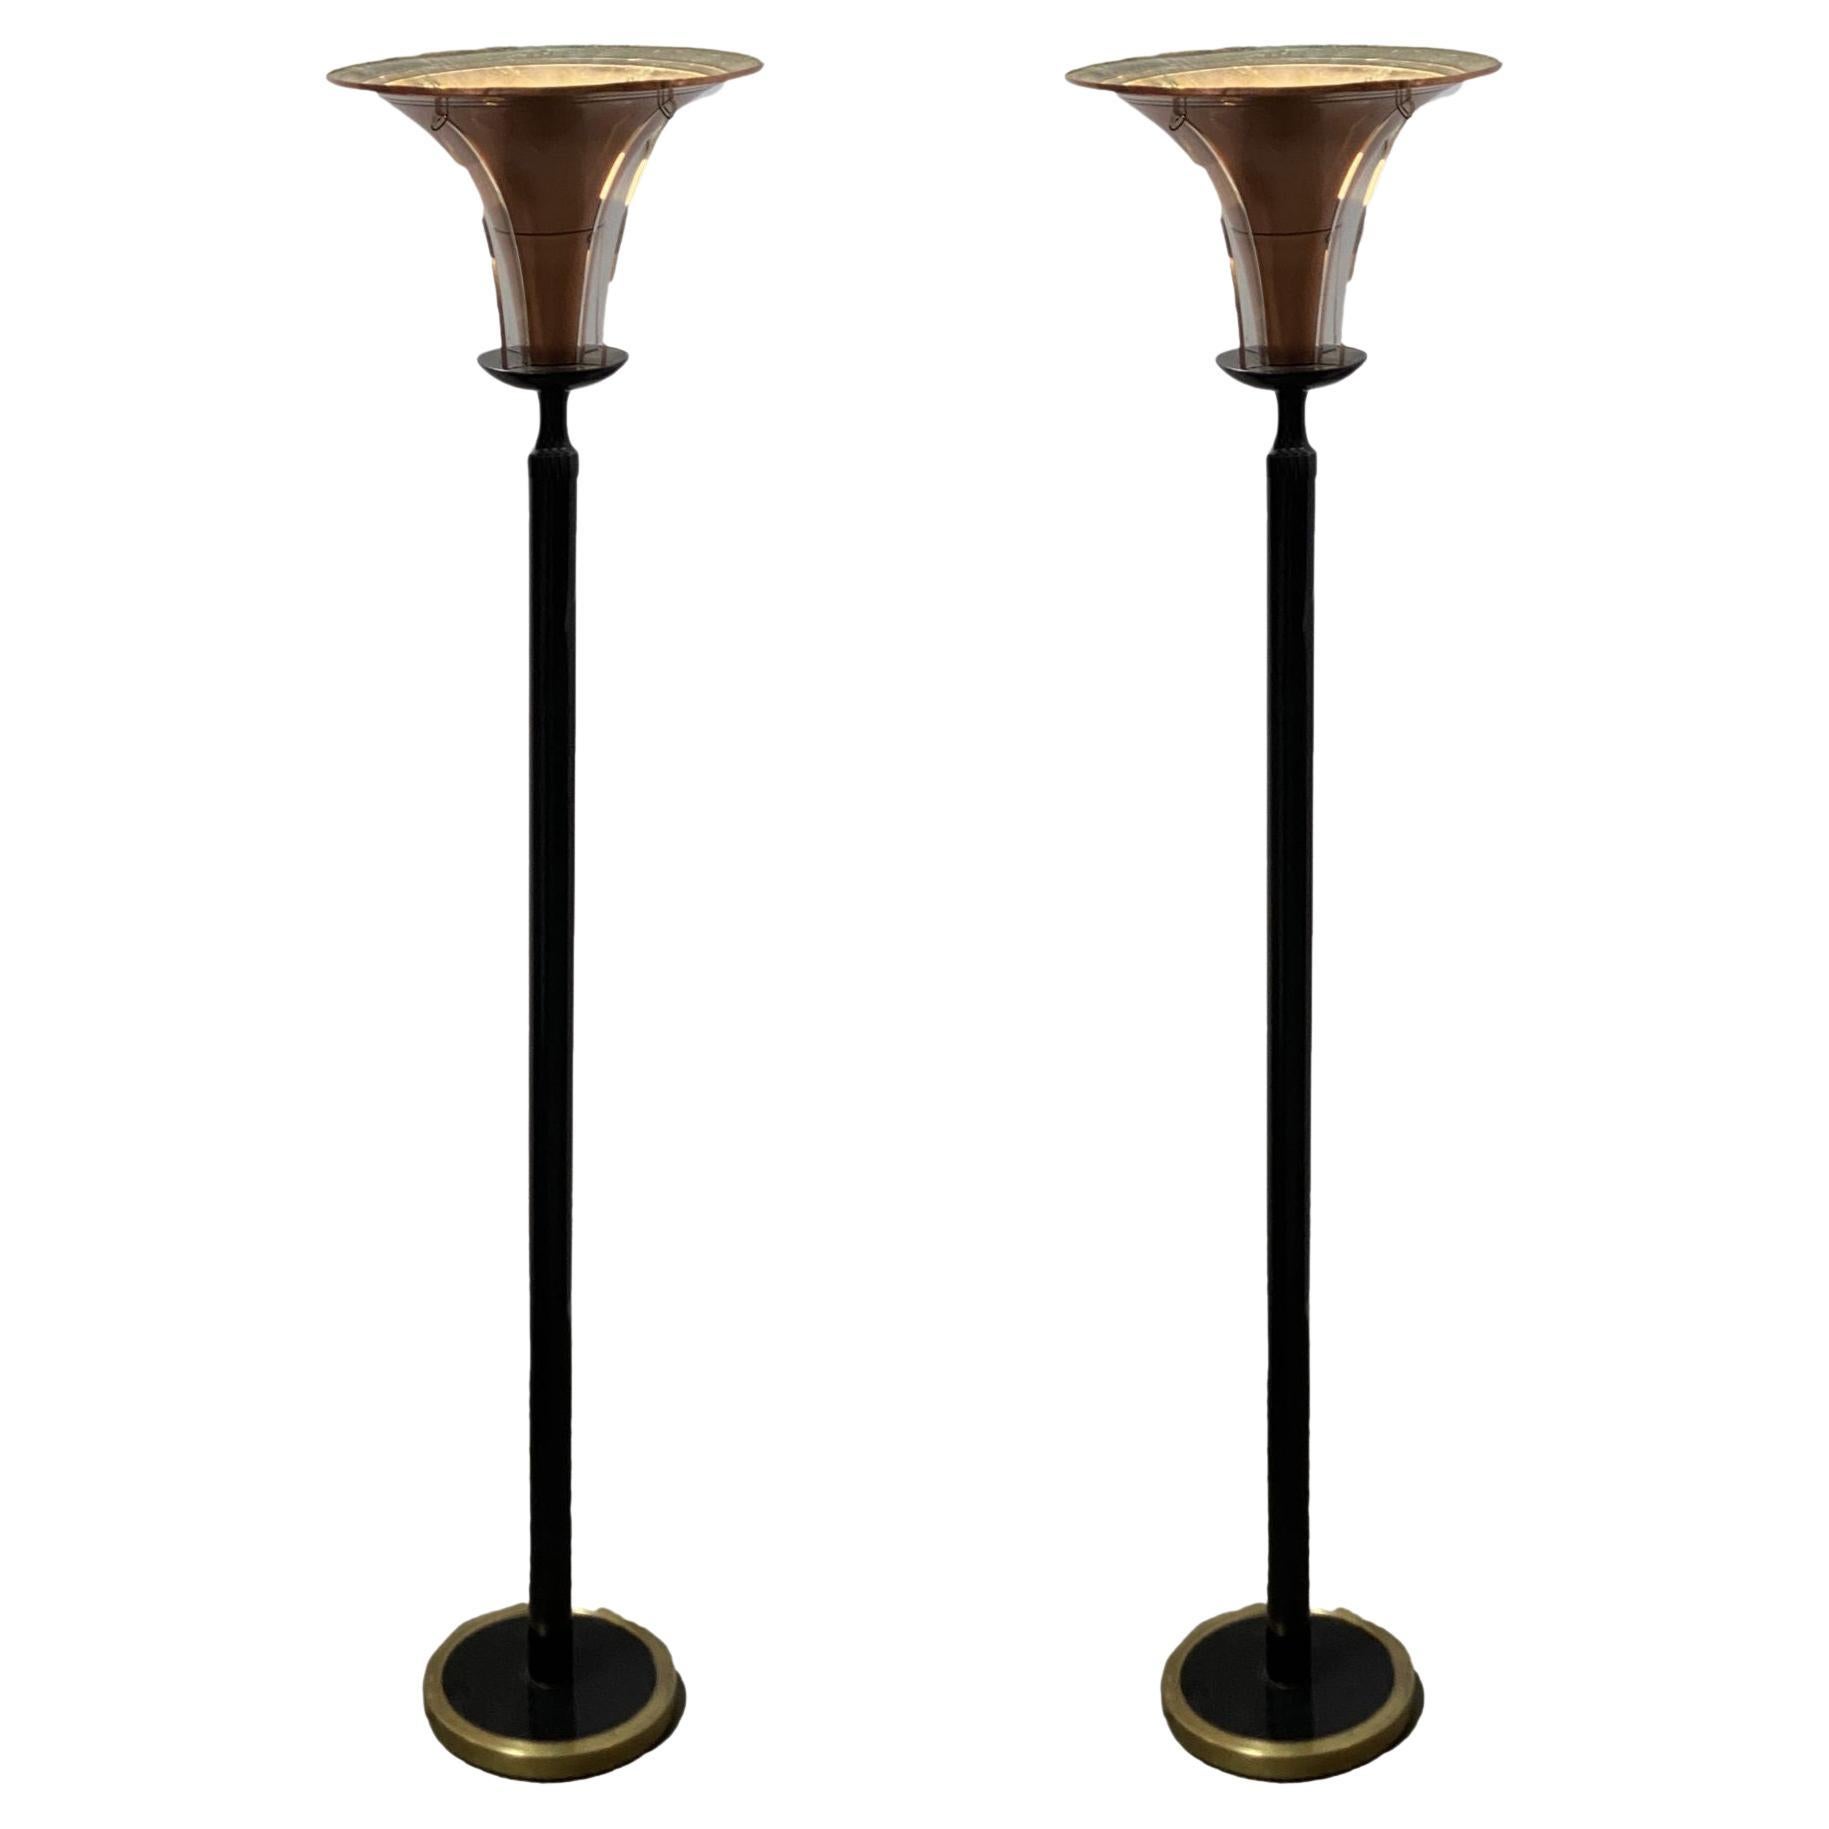 High Style Brass and Copper Art Deco Torchiere Floor Lamp w/ Acrylic Accents